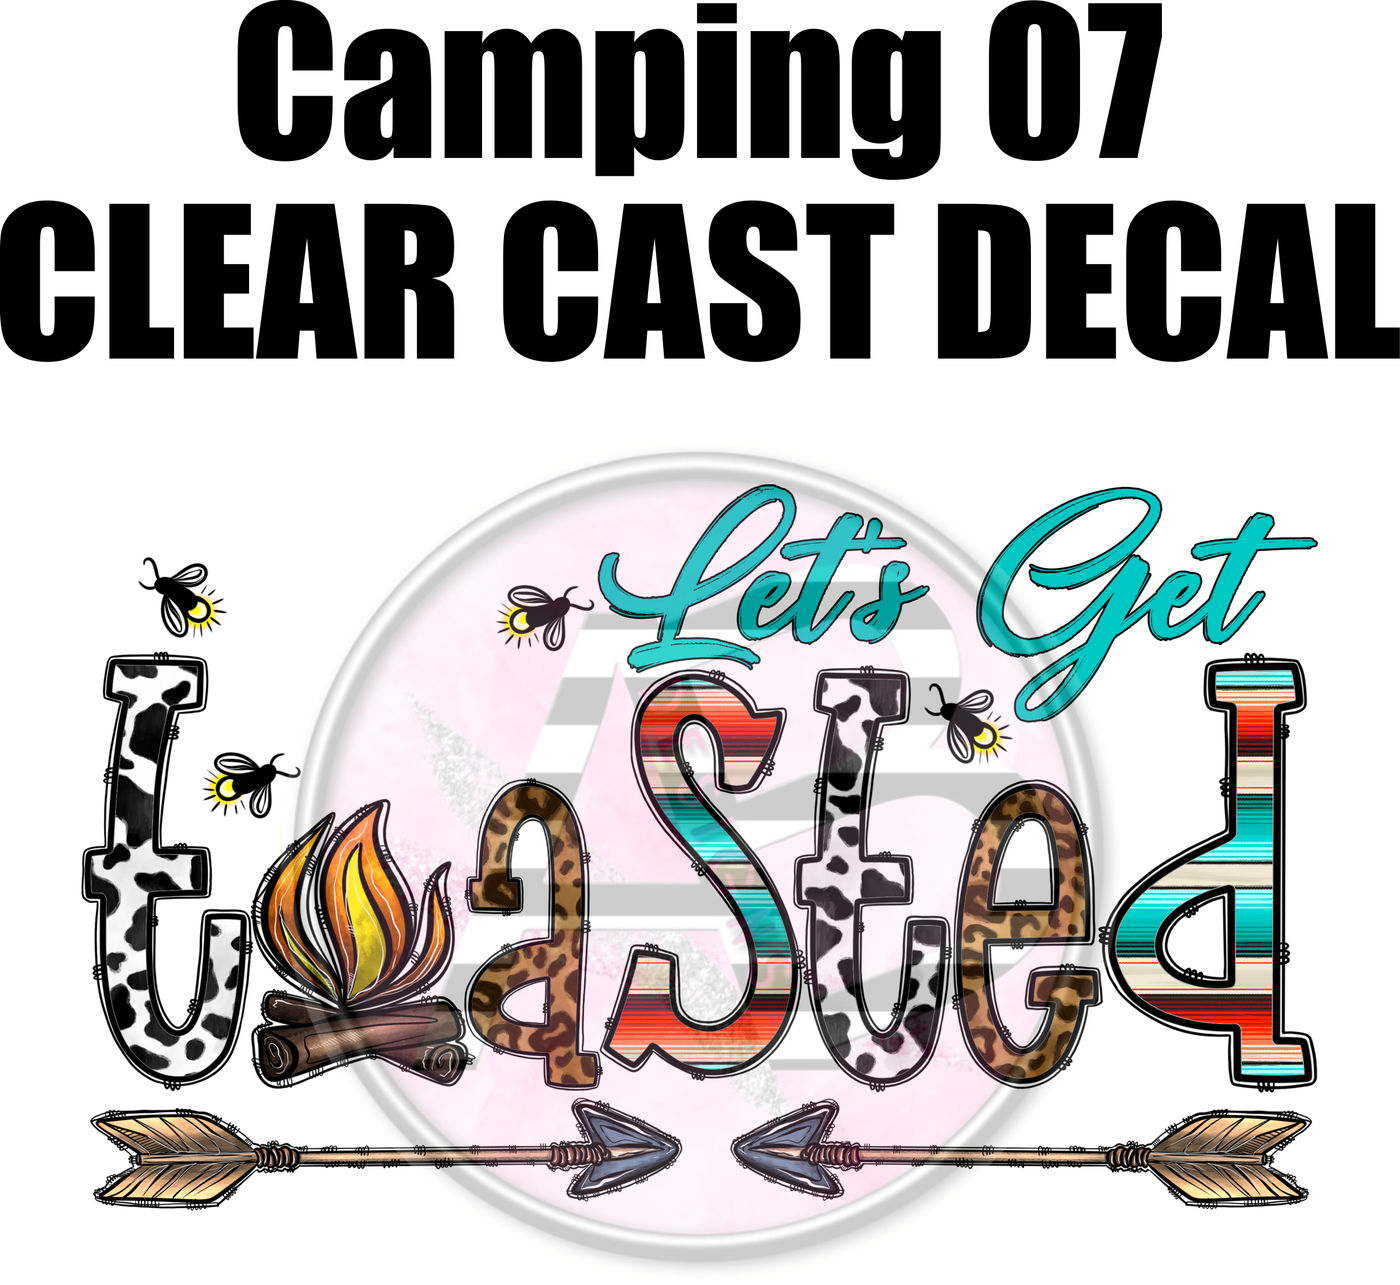 Camping 07 - Clear Cast Decal